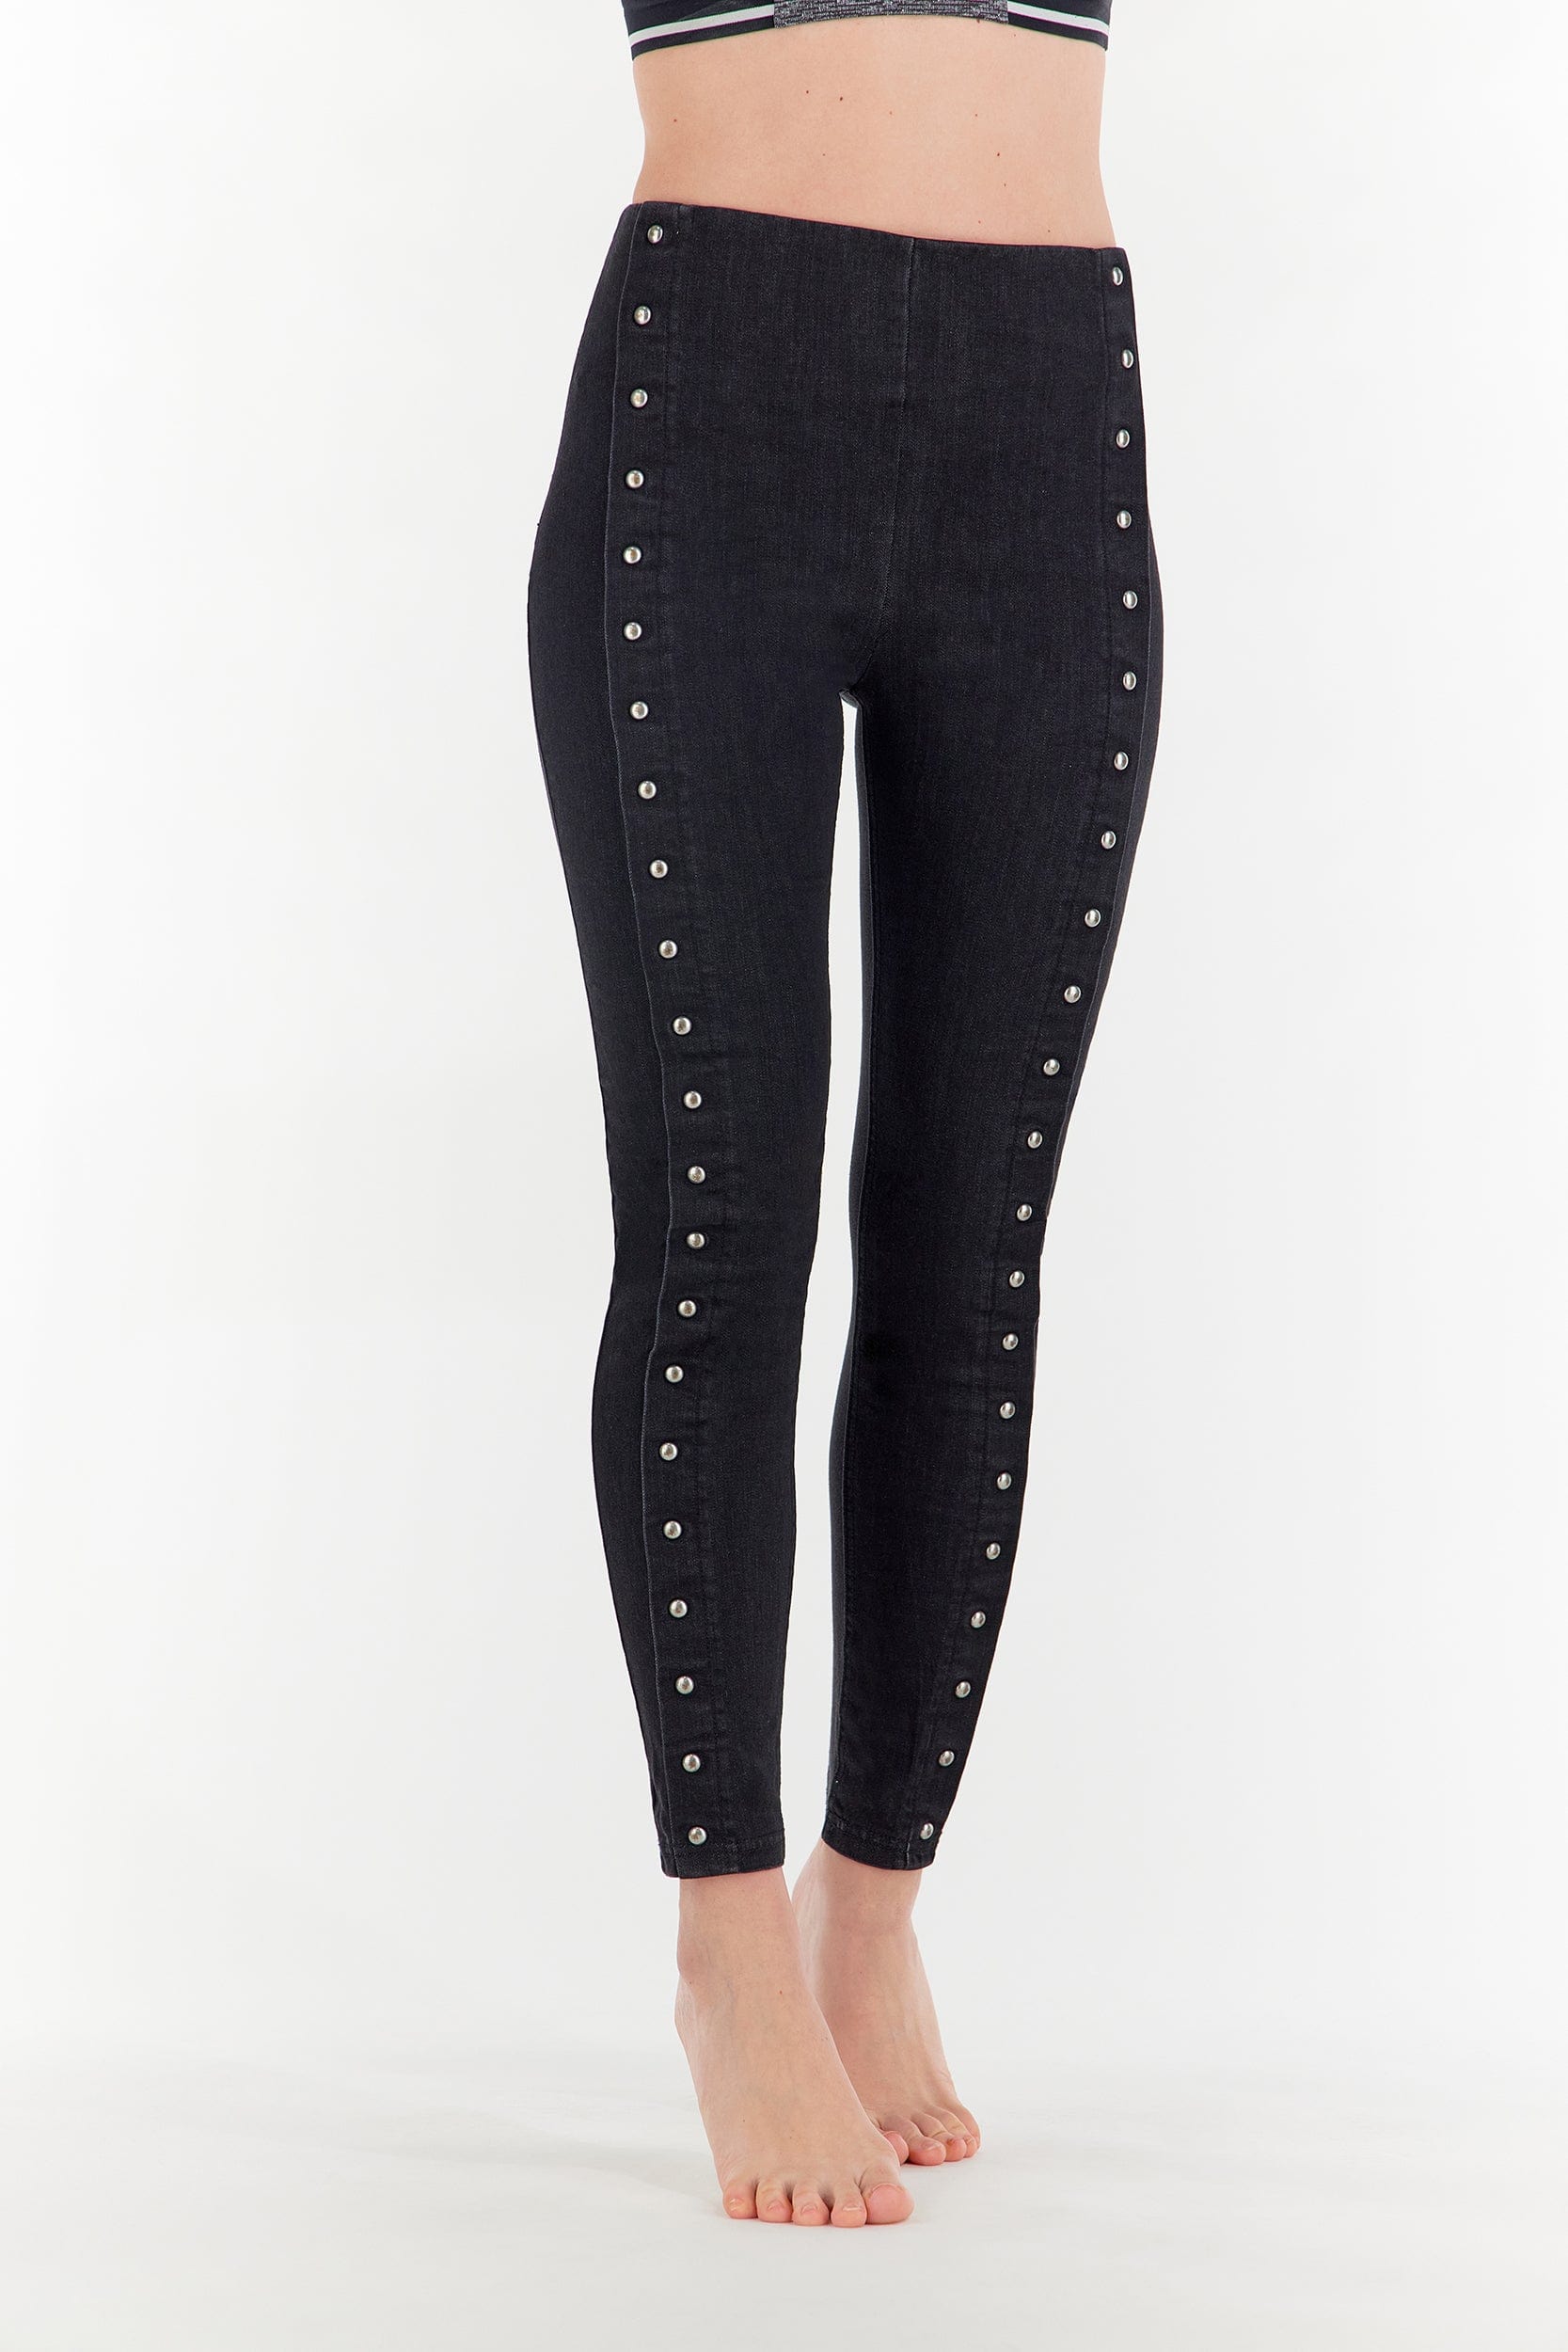 WR.UP® Denim with Studs - High Waisted - Full Length - Black + Black Stitching 3